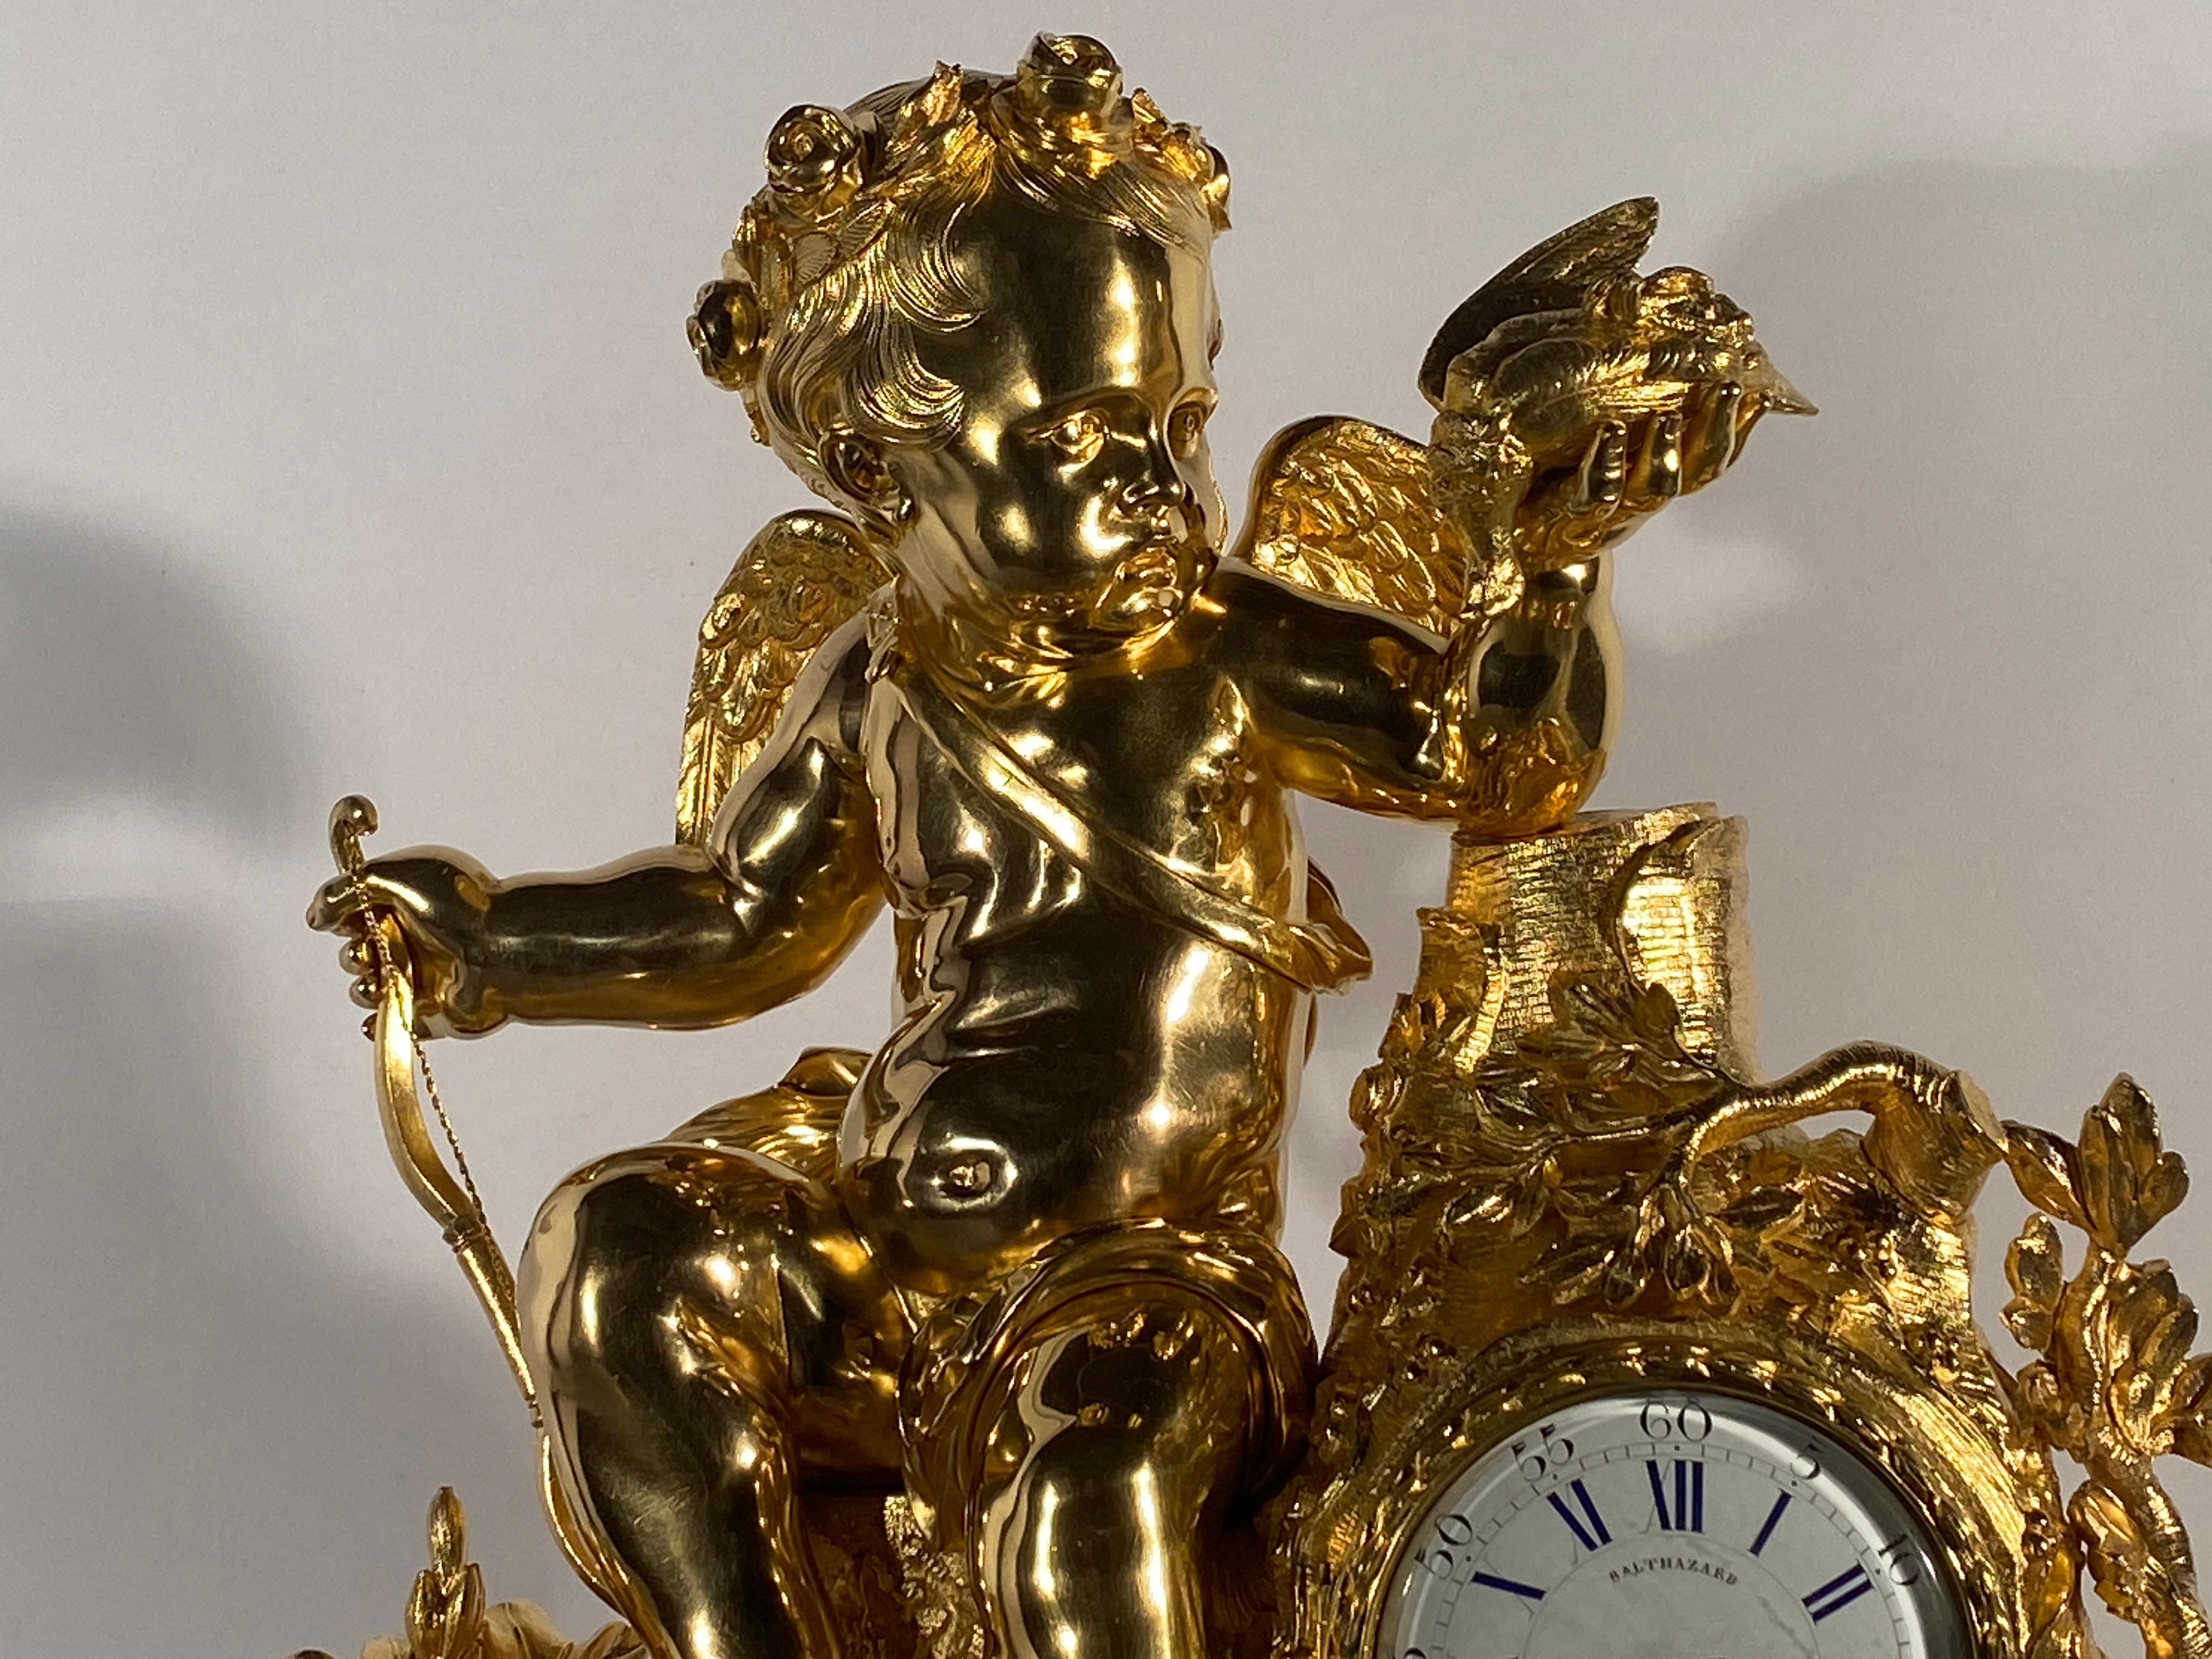 Spectacular trim consisting of a clock and its candelabras decorated with Cupid sits on a tree stump.
In Roman mythology, Cupid, son of Venus and Mars, is the god of love. The original gilding is of exceptional quality and in a unique state of